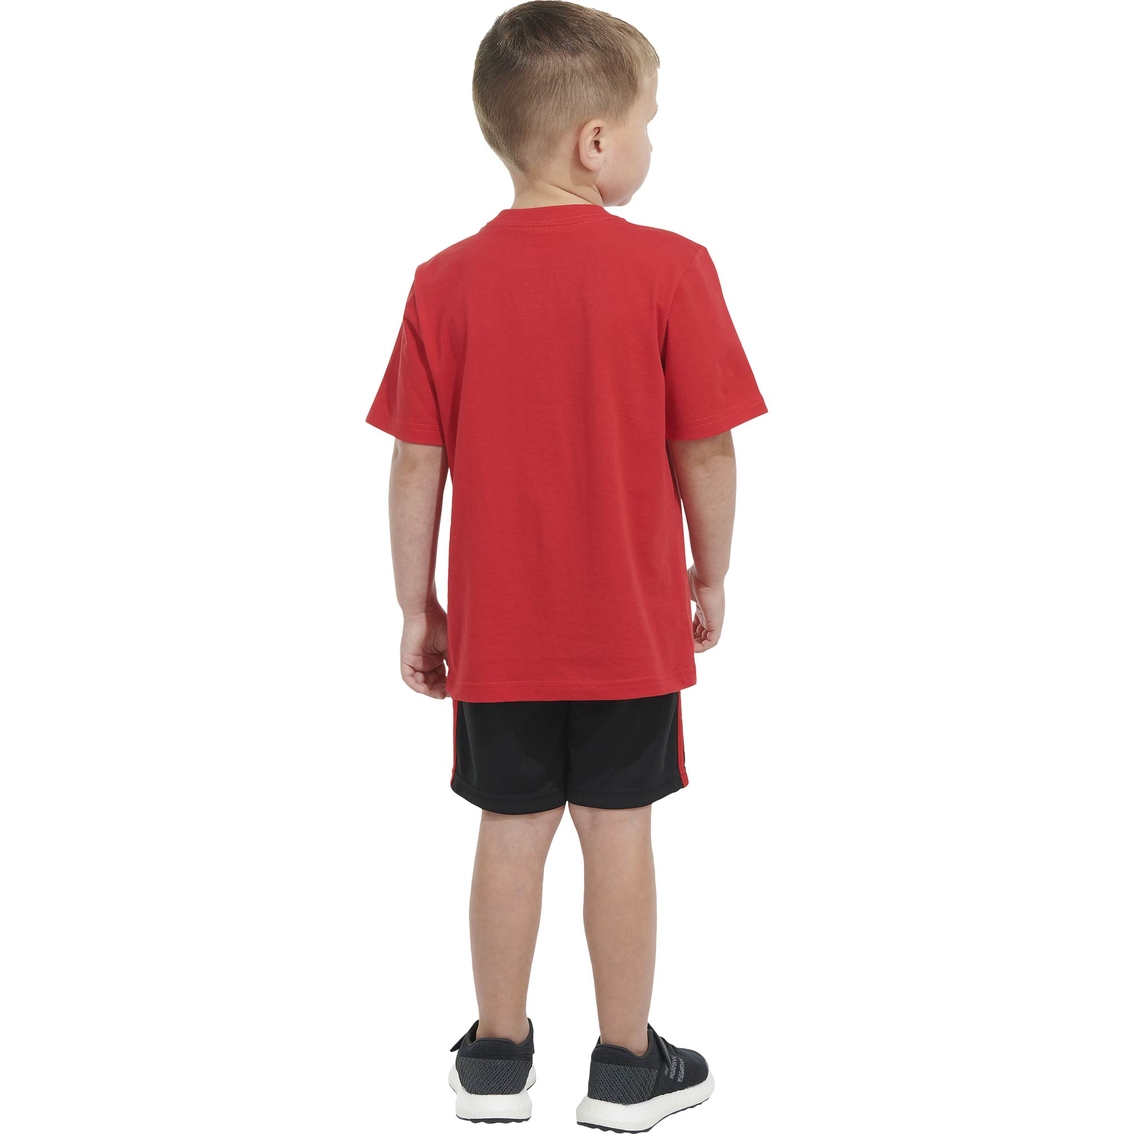 Adidas Toddler Boys Cotton Graphic Tee and Shorts Set - Image 2 of 7